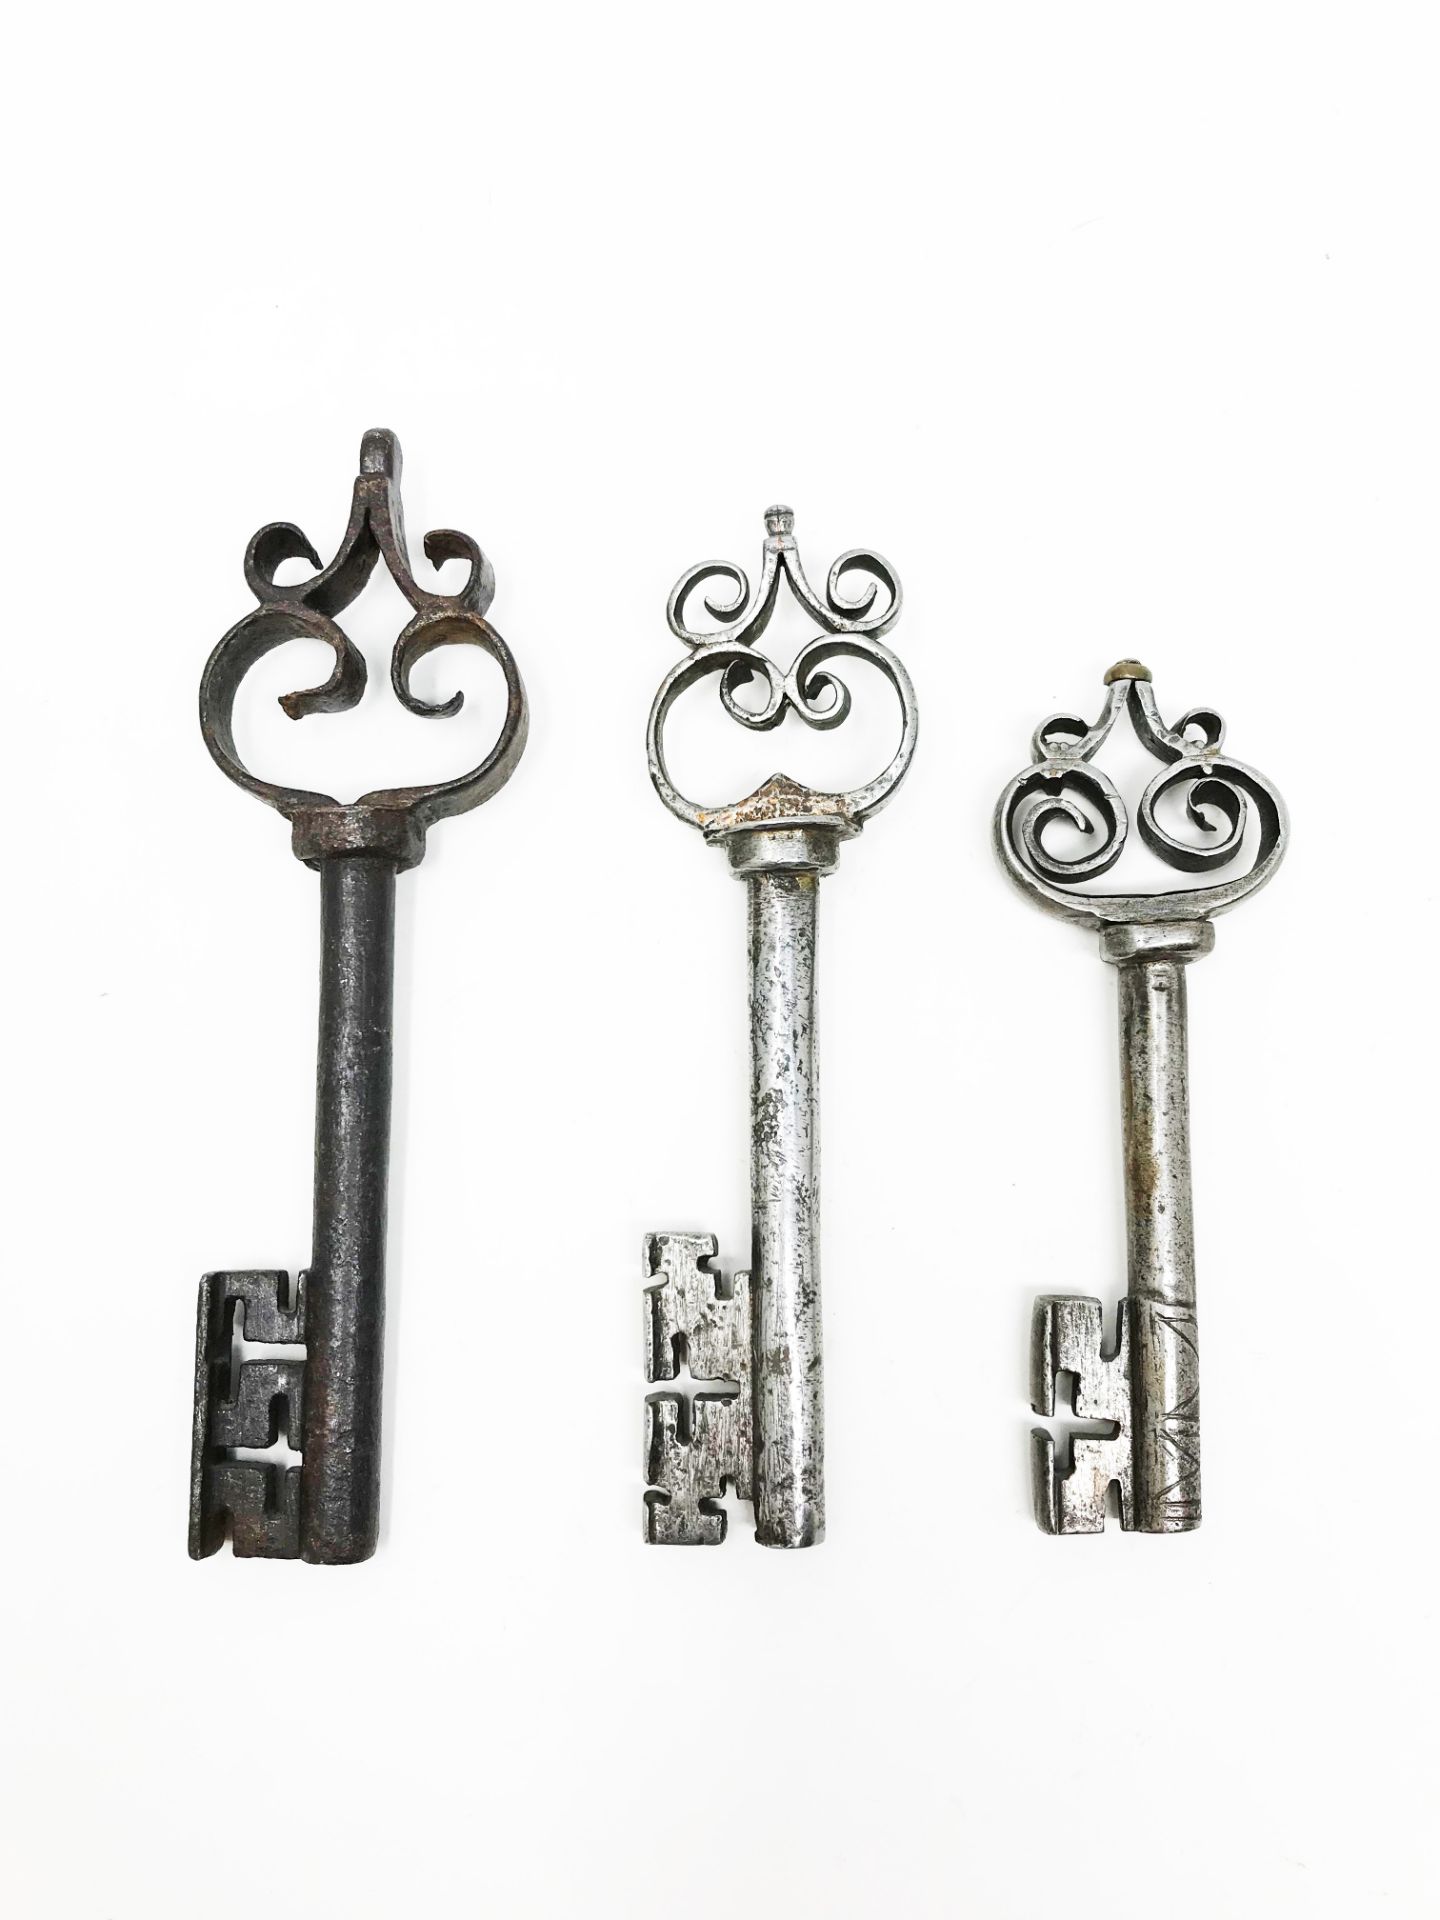 Three German keys16 - 14, 16 - 11, 78 cmPart of the chapter "From beyond the Rhine". - Image 2 of 2